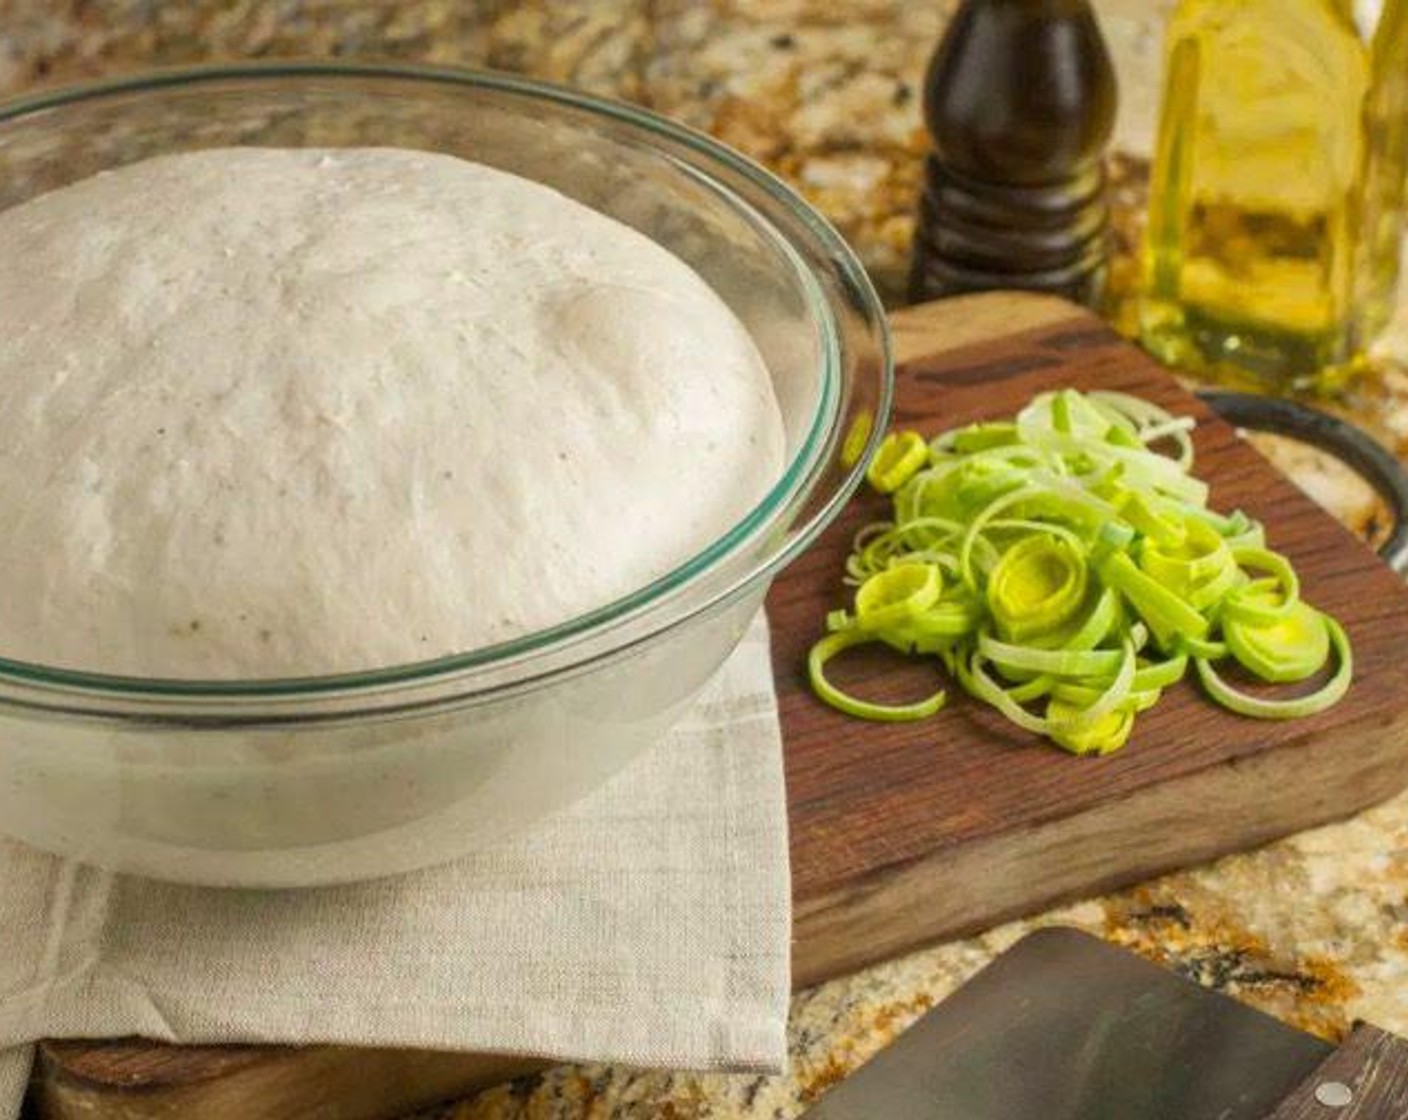 step 4 Place dough in a large oiled bowl and cover with plastic wrap or kitchen towel. Allow to rise in a warm, draft-free area until double in size, approximately 1 hour.